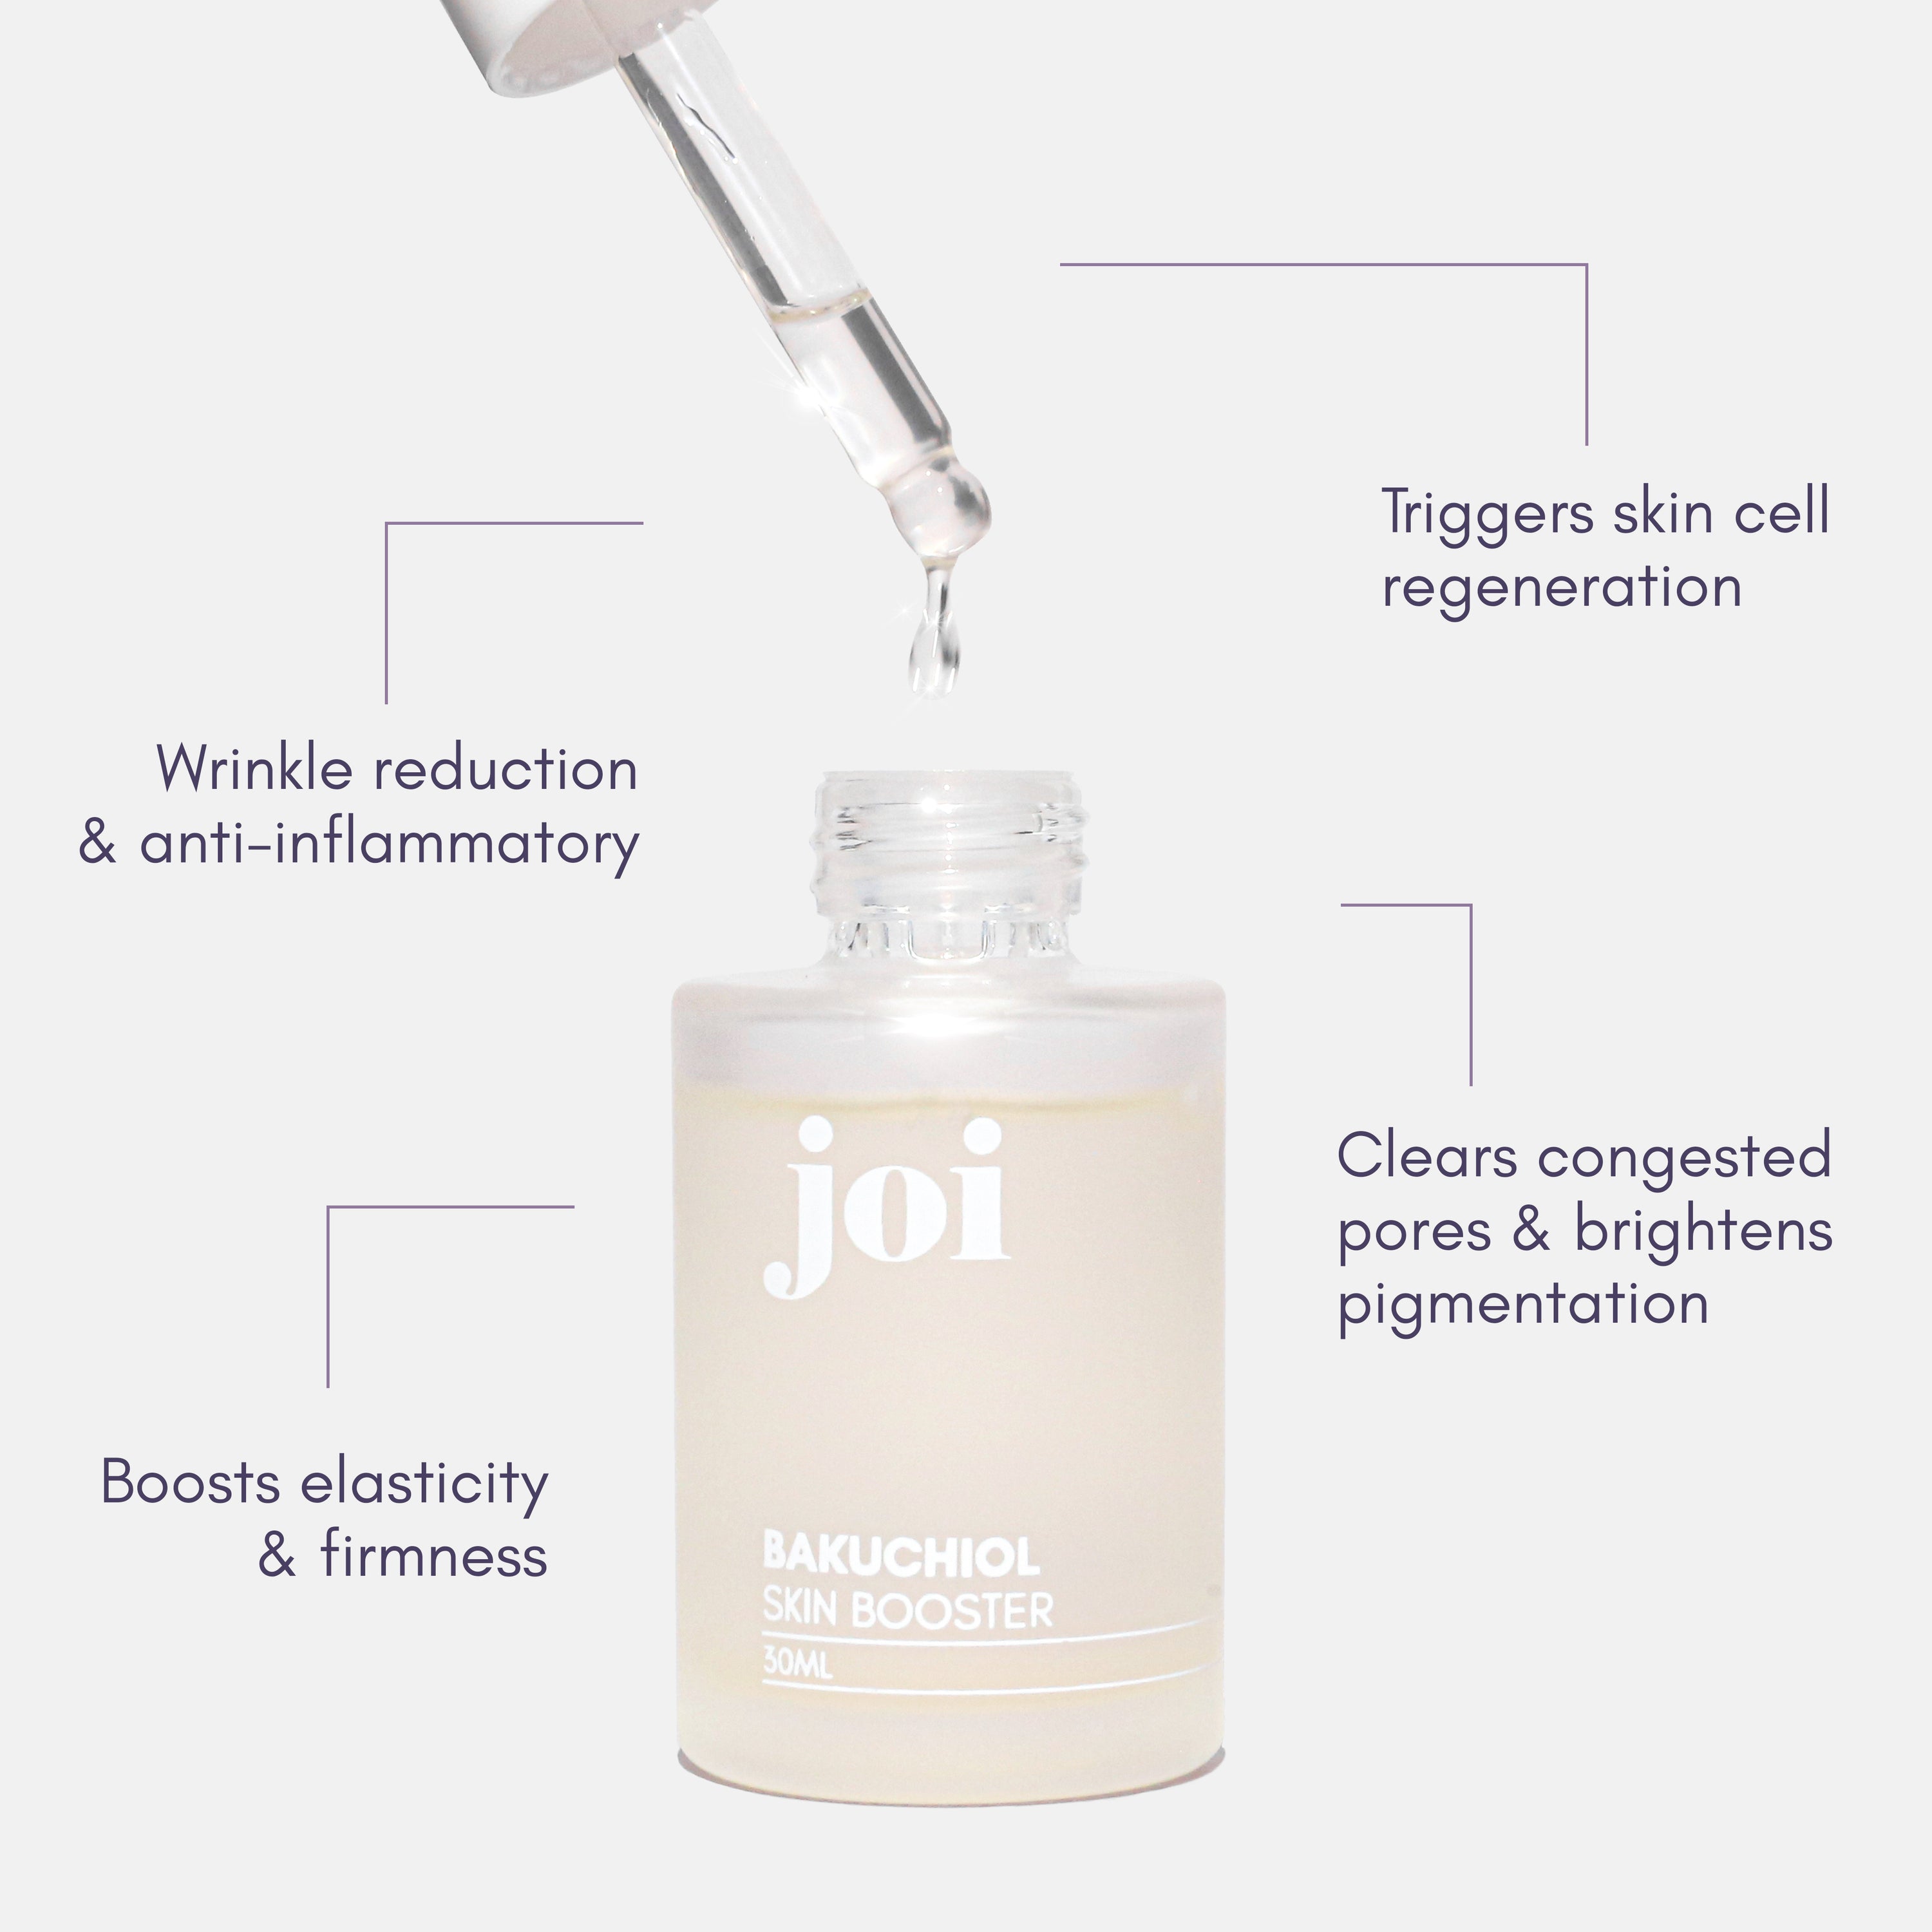 All Your Q’s About Our Bakuchiol Skin Booster, Answered